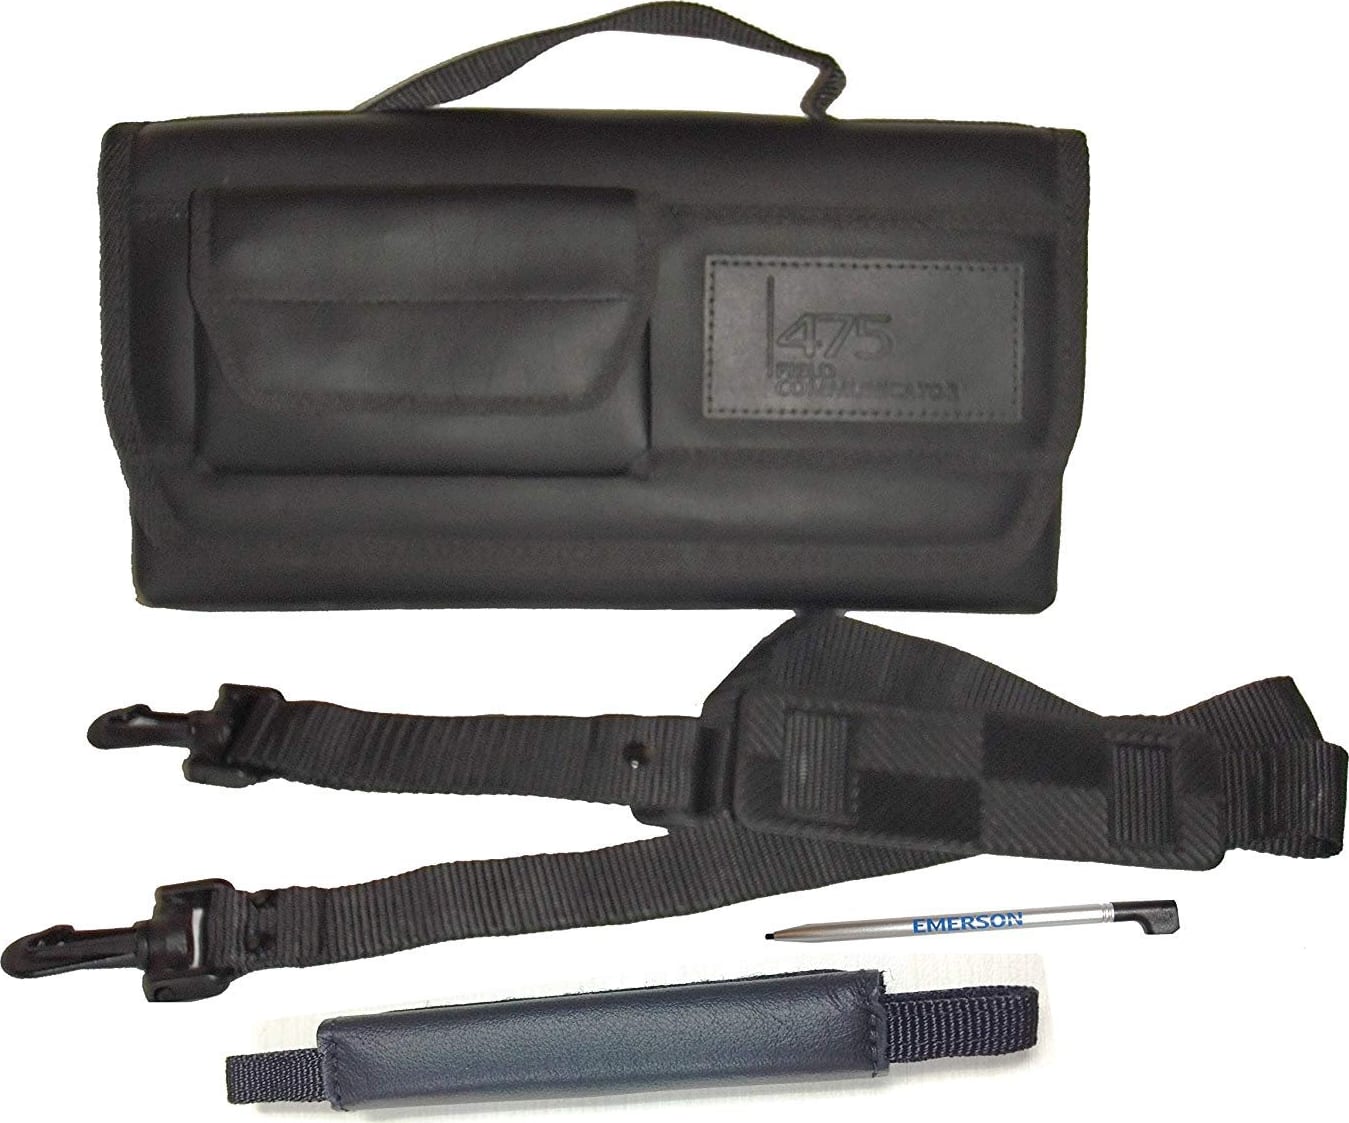 Emerson 00475-0005-0003 Carrying Case